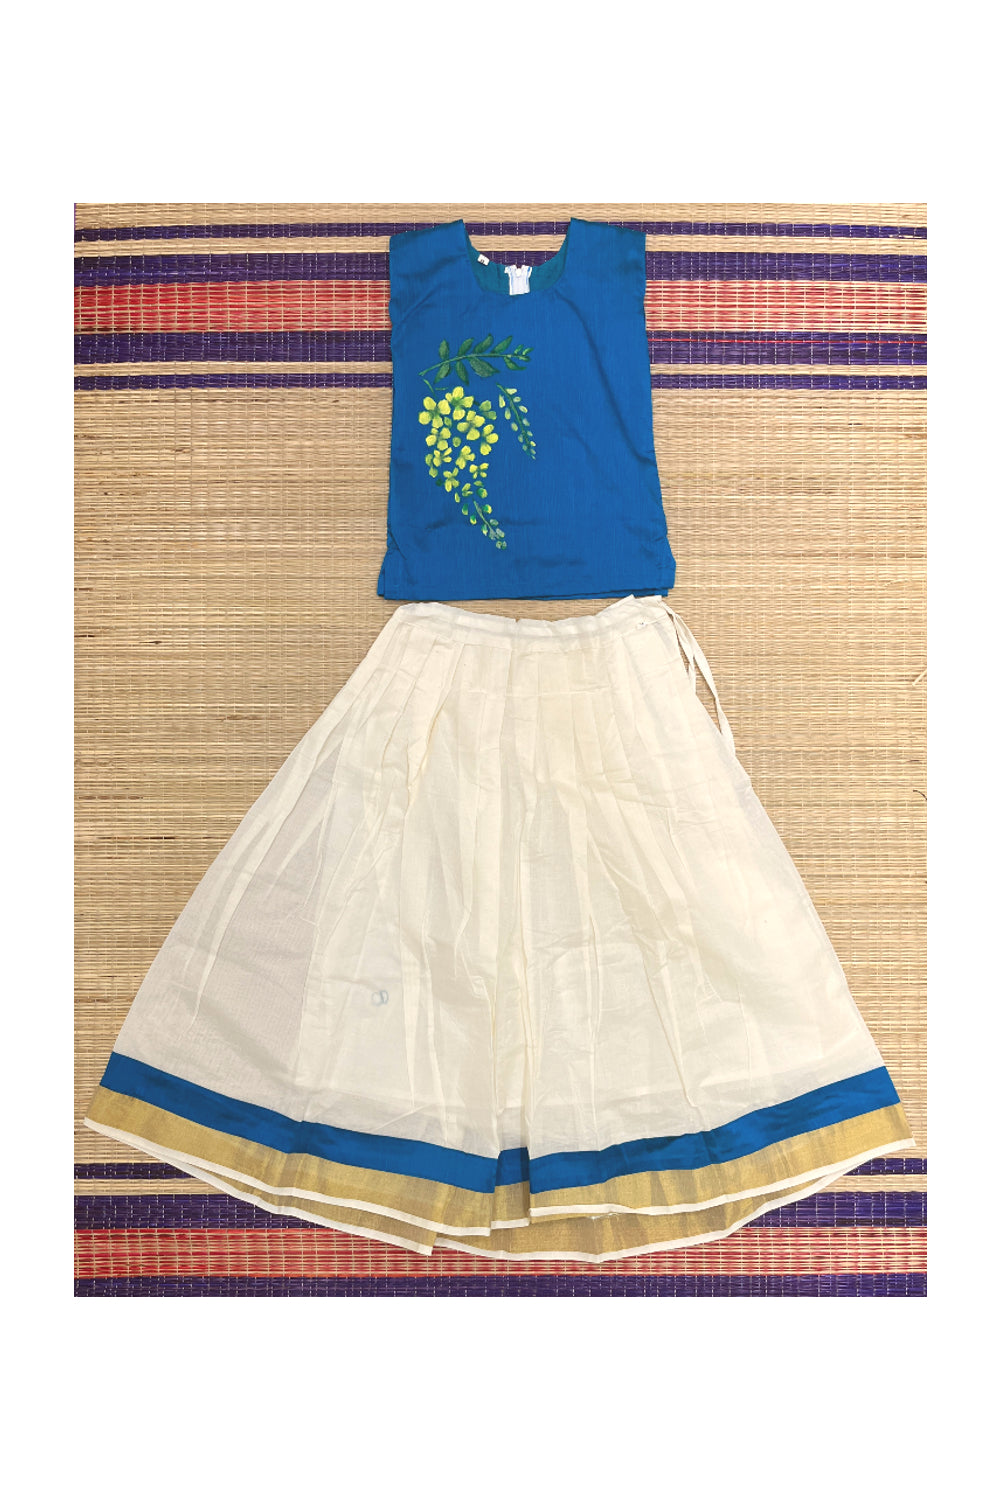 Southloom Kerala Pavada Blue Blouse with Floral Mural Designs (Age - 8 Years)